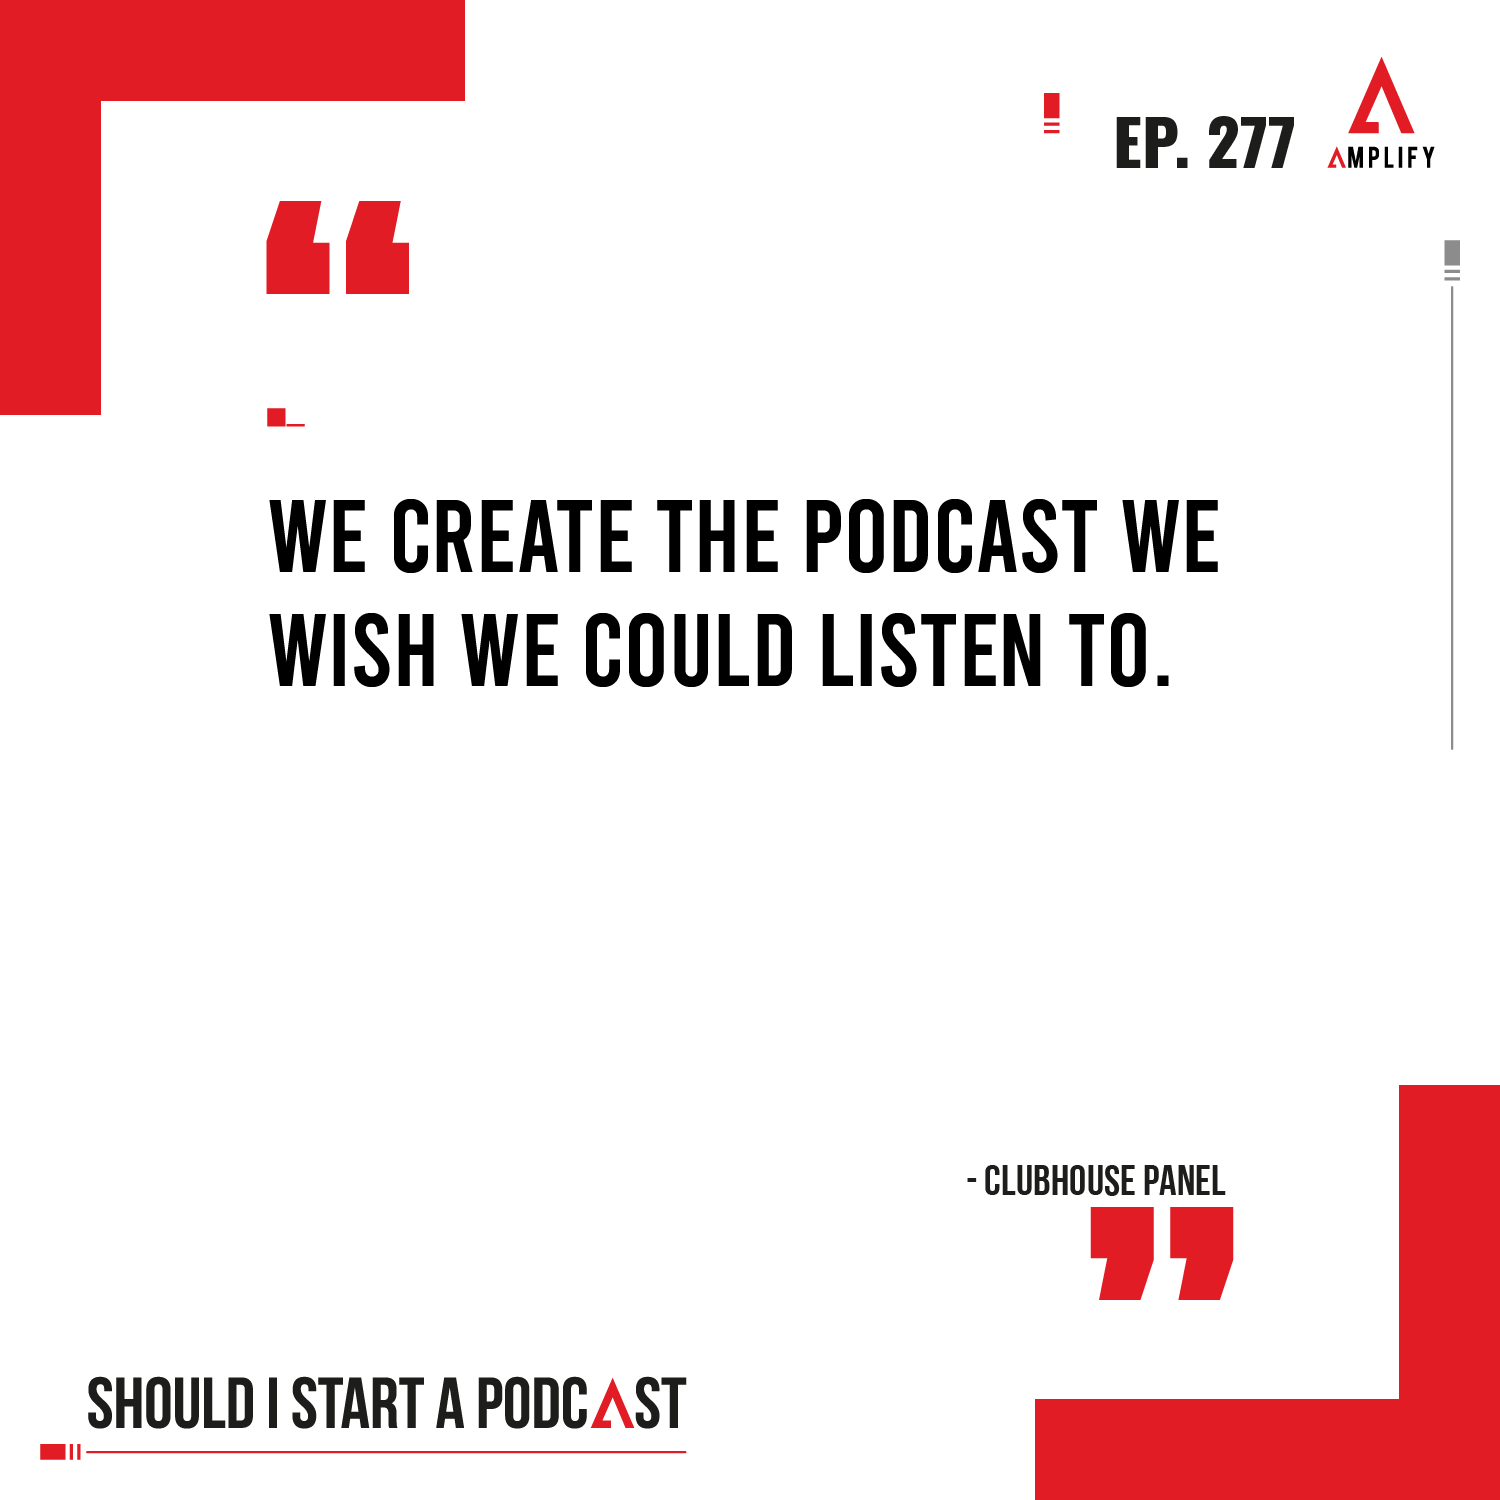 Decorative image with the quote “We create the podcast we wish we could listen to.”